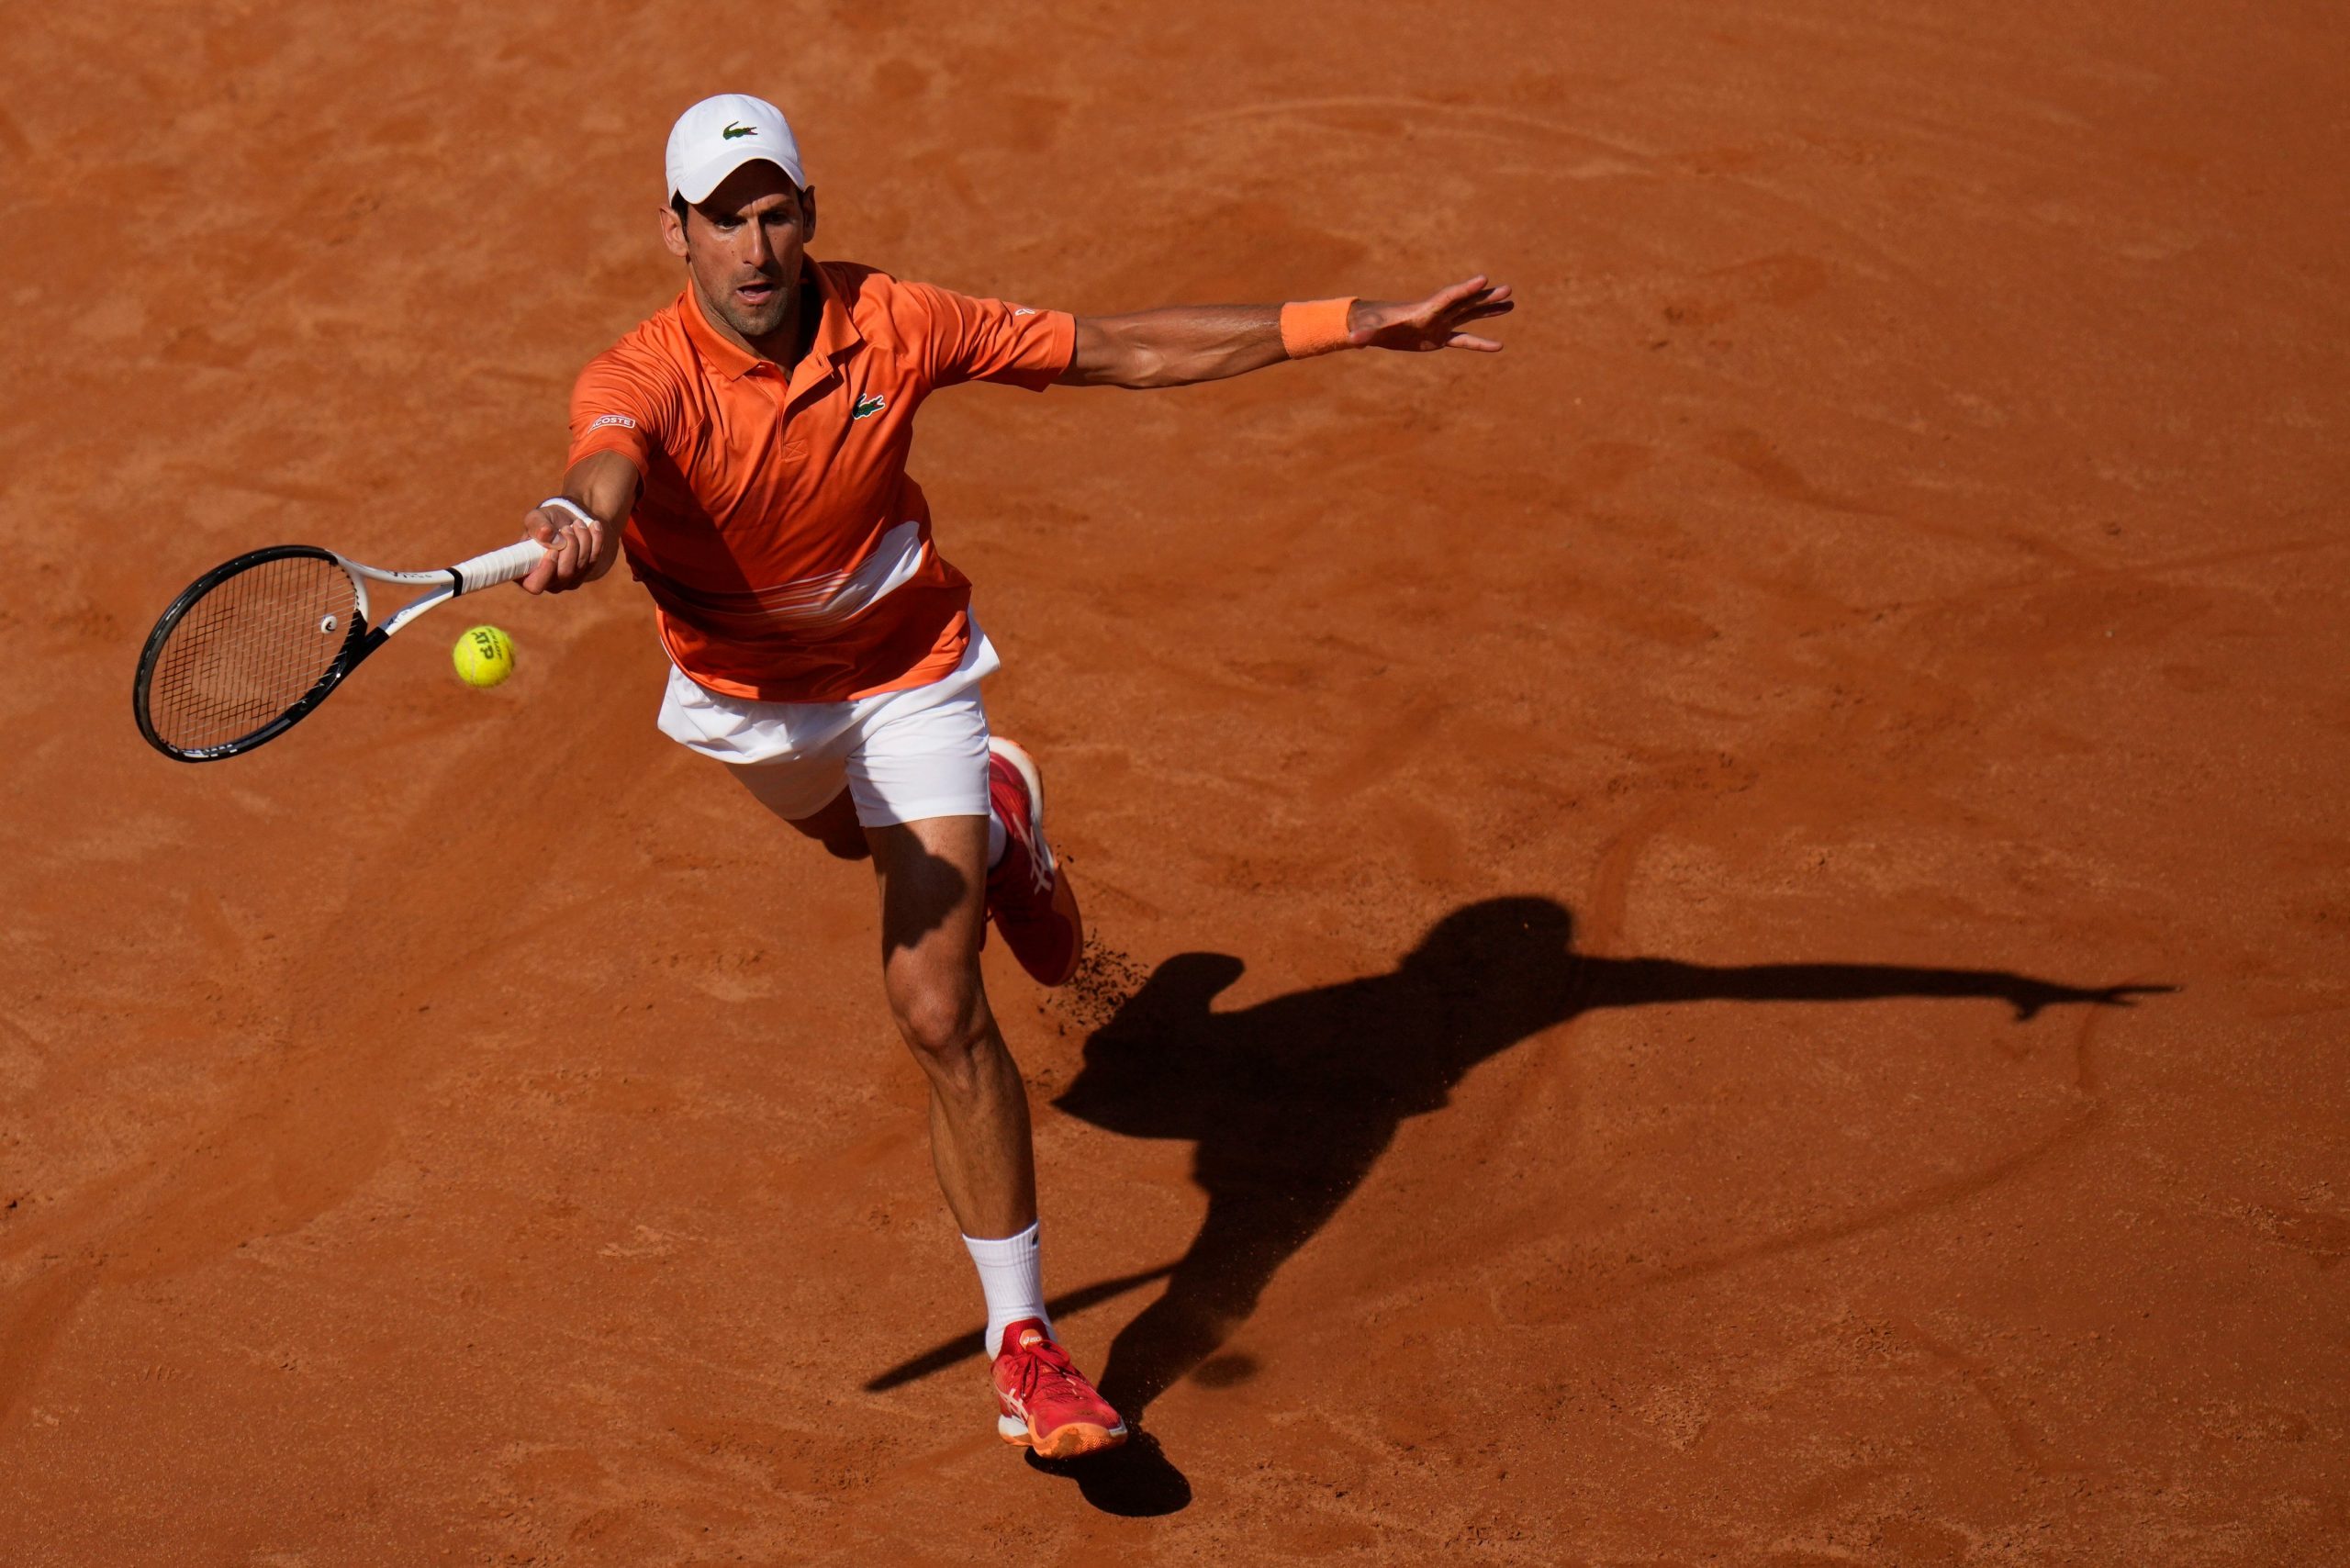 French Open 2022: From Djokovic to Swiatek, here are probable contenders